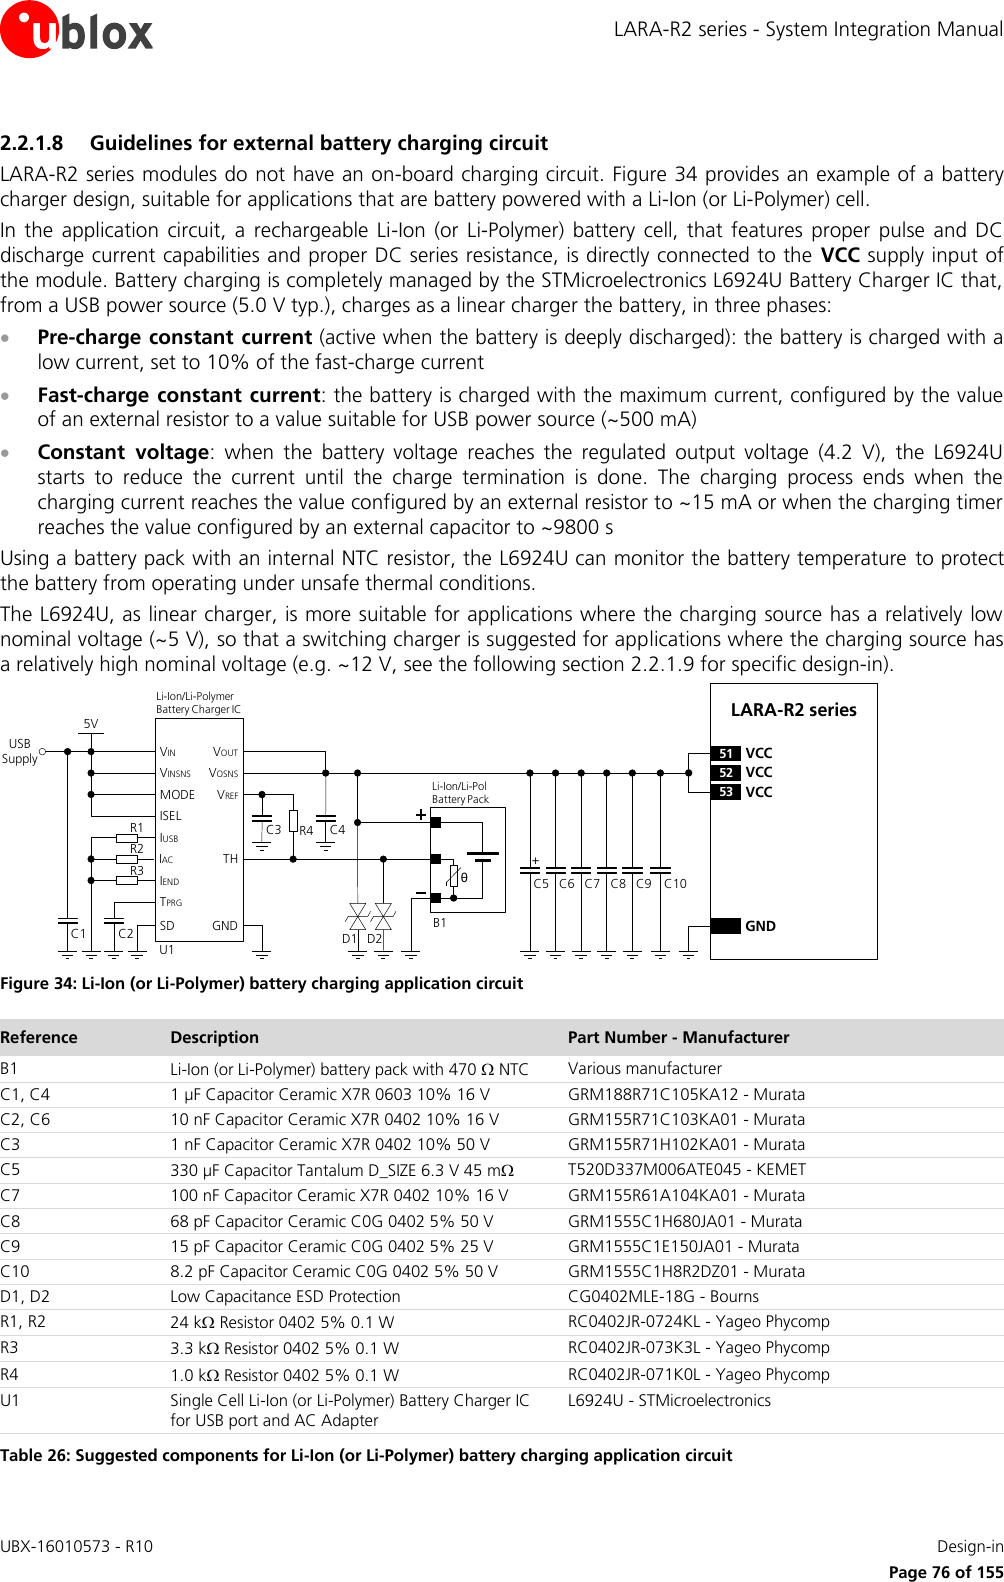 LARA-R2 series - System Integration Manual UBX-16010573 - R10    Design-in     Page 76 of 155 2.2.1.8 Guidelines for external battery charging circuit LARA-R2 series modules do not have an on-board charging circuit. Figure 34 provides an example of a battery charger design, suitable for applications that are battery powered with a Li-Ion (or Li-Polymer) cell. In  the  application  circuit,  a  rechargeable  Li-Ion  (or Li-Polymer)  battery  cell,  that  features  proper  pulse  and  DC discharge current capabilities and proper DC series resistance, is directly connected to the  VCC supply input of the module. Battery charging is completely managed by the STMicroelectronics L6924U Battery Charger IC that, from a USB power source (5.0 V typ.), charges as a linear charger the battery, in three phases:  Pre-charge constant current (active when the battery is deeply discharged): the battery is charged with a low current, set to 10% of the fast-charge current  Fast-charge constant  current: the battery is charged with the maximum current, configured by the value of an external resistor to a value suitable for USB power source (~500 mA)  Constant  voltage:  when  the  battery  voltage  reaches  the  regulated  output  voltage  (4.2  V),  the  L6924U starts  to  reduce  the  current  until  the  charge  termination  is  done.  The  charging  process  ends  when  the charging current reaches the value configured by an external resistor to ~15 mA or when the charging timer reaches the value configured by an external capacitor to ~9800 s Using a battery pack with an internal NTC resistor, the L6924U can monitor the battery temperature to protect the battery from operating under unsafe thermal conditions. The L6924U, as linear charger, is more suitable for applications where the charging source has a relatively low nominal voltage (~5 V), so that a switching charger is suggested for applications where the charging source has a relatively high nominal voltage (e.g. ~12 V, see the following section 2.2.1.9 for specific design-in). C5 C8GNDC7C6 C9LARA-R2 series52 VCC53 VCC51 VCC+USB SupplyC3 R4θU1IUSBIACIENDTPRGSDVINVINSNSMODEISELC2C15VTHGNDVOUTVOSNSVREFR1R2R3Li-Ion/Li-Pol Battery PackD1B1C4Li-Ion/Li-Polymer    Battery Charger ICD2C10 Figure 34: Li-Ion (or Li-Polymer) battery charging application circuit Reference Description Part Number - Manufacturer B1 Li-Ion (or Li-Polymer) battery pack with 470  NTC Various manufacturer C1, C4 1 µF Capacitor Ceramic X7R 0603 10% 16 V GRM188R71C105KA12 - Murata C2, C6 10 nF Capacitor Ceramic X7R 0402 10% 16 V GRM155R71C103KA01 - Murata C3 1 nF Capacitor Ceramic X7R 0402 10% 50 V GRM155R71H102KA01 - Murata C5 330 µF Capacitor Tantalum D_SIZE 6.3 V 45 m T520D337M006ATE045 - KEMET C7 100 nF Capacitor Ceramic X7R 0402 10% 16 V GRM155R61A104KA01 - Murata C8 68 pF Capacitor Ceramic C0G 0402 5% 50 V GRM1555C1H680JA01 - Murata C9 15 pF Capacitor Ceramic C0G 0402 5% 25 V  GRM1555C1E150JA01 - Murata C10 8.2 pF Capacitor Ceramic C0G 0402 5% 50 V GRM1555C1H8R2DZ01 - Murata D1, D2 Low Capacitance ESD Protection CG0402MLE-18G - Bourns R1, R2 24 k Resistor 0402 5% 0.1 W RC0402JR-0724KL - Yageo Phycomp R3 3.3 k Resistor 0402 5% 0.1 W RC0402JR-073K3L - Yageo Phycomp R4 1.0 k Resistor 0402 5% 0.1 W RC0402JR-071K0L - Yageo Phycomp U1 Single Cell Li-Ion (or Li-Polymer) Battery Charger IC for USB port and AC Adapter L6924U - STMicroelectronics Table 26: Suggested components for Li-Ion (or Li-Polymer) battery charging application circuit  